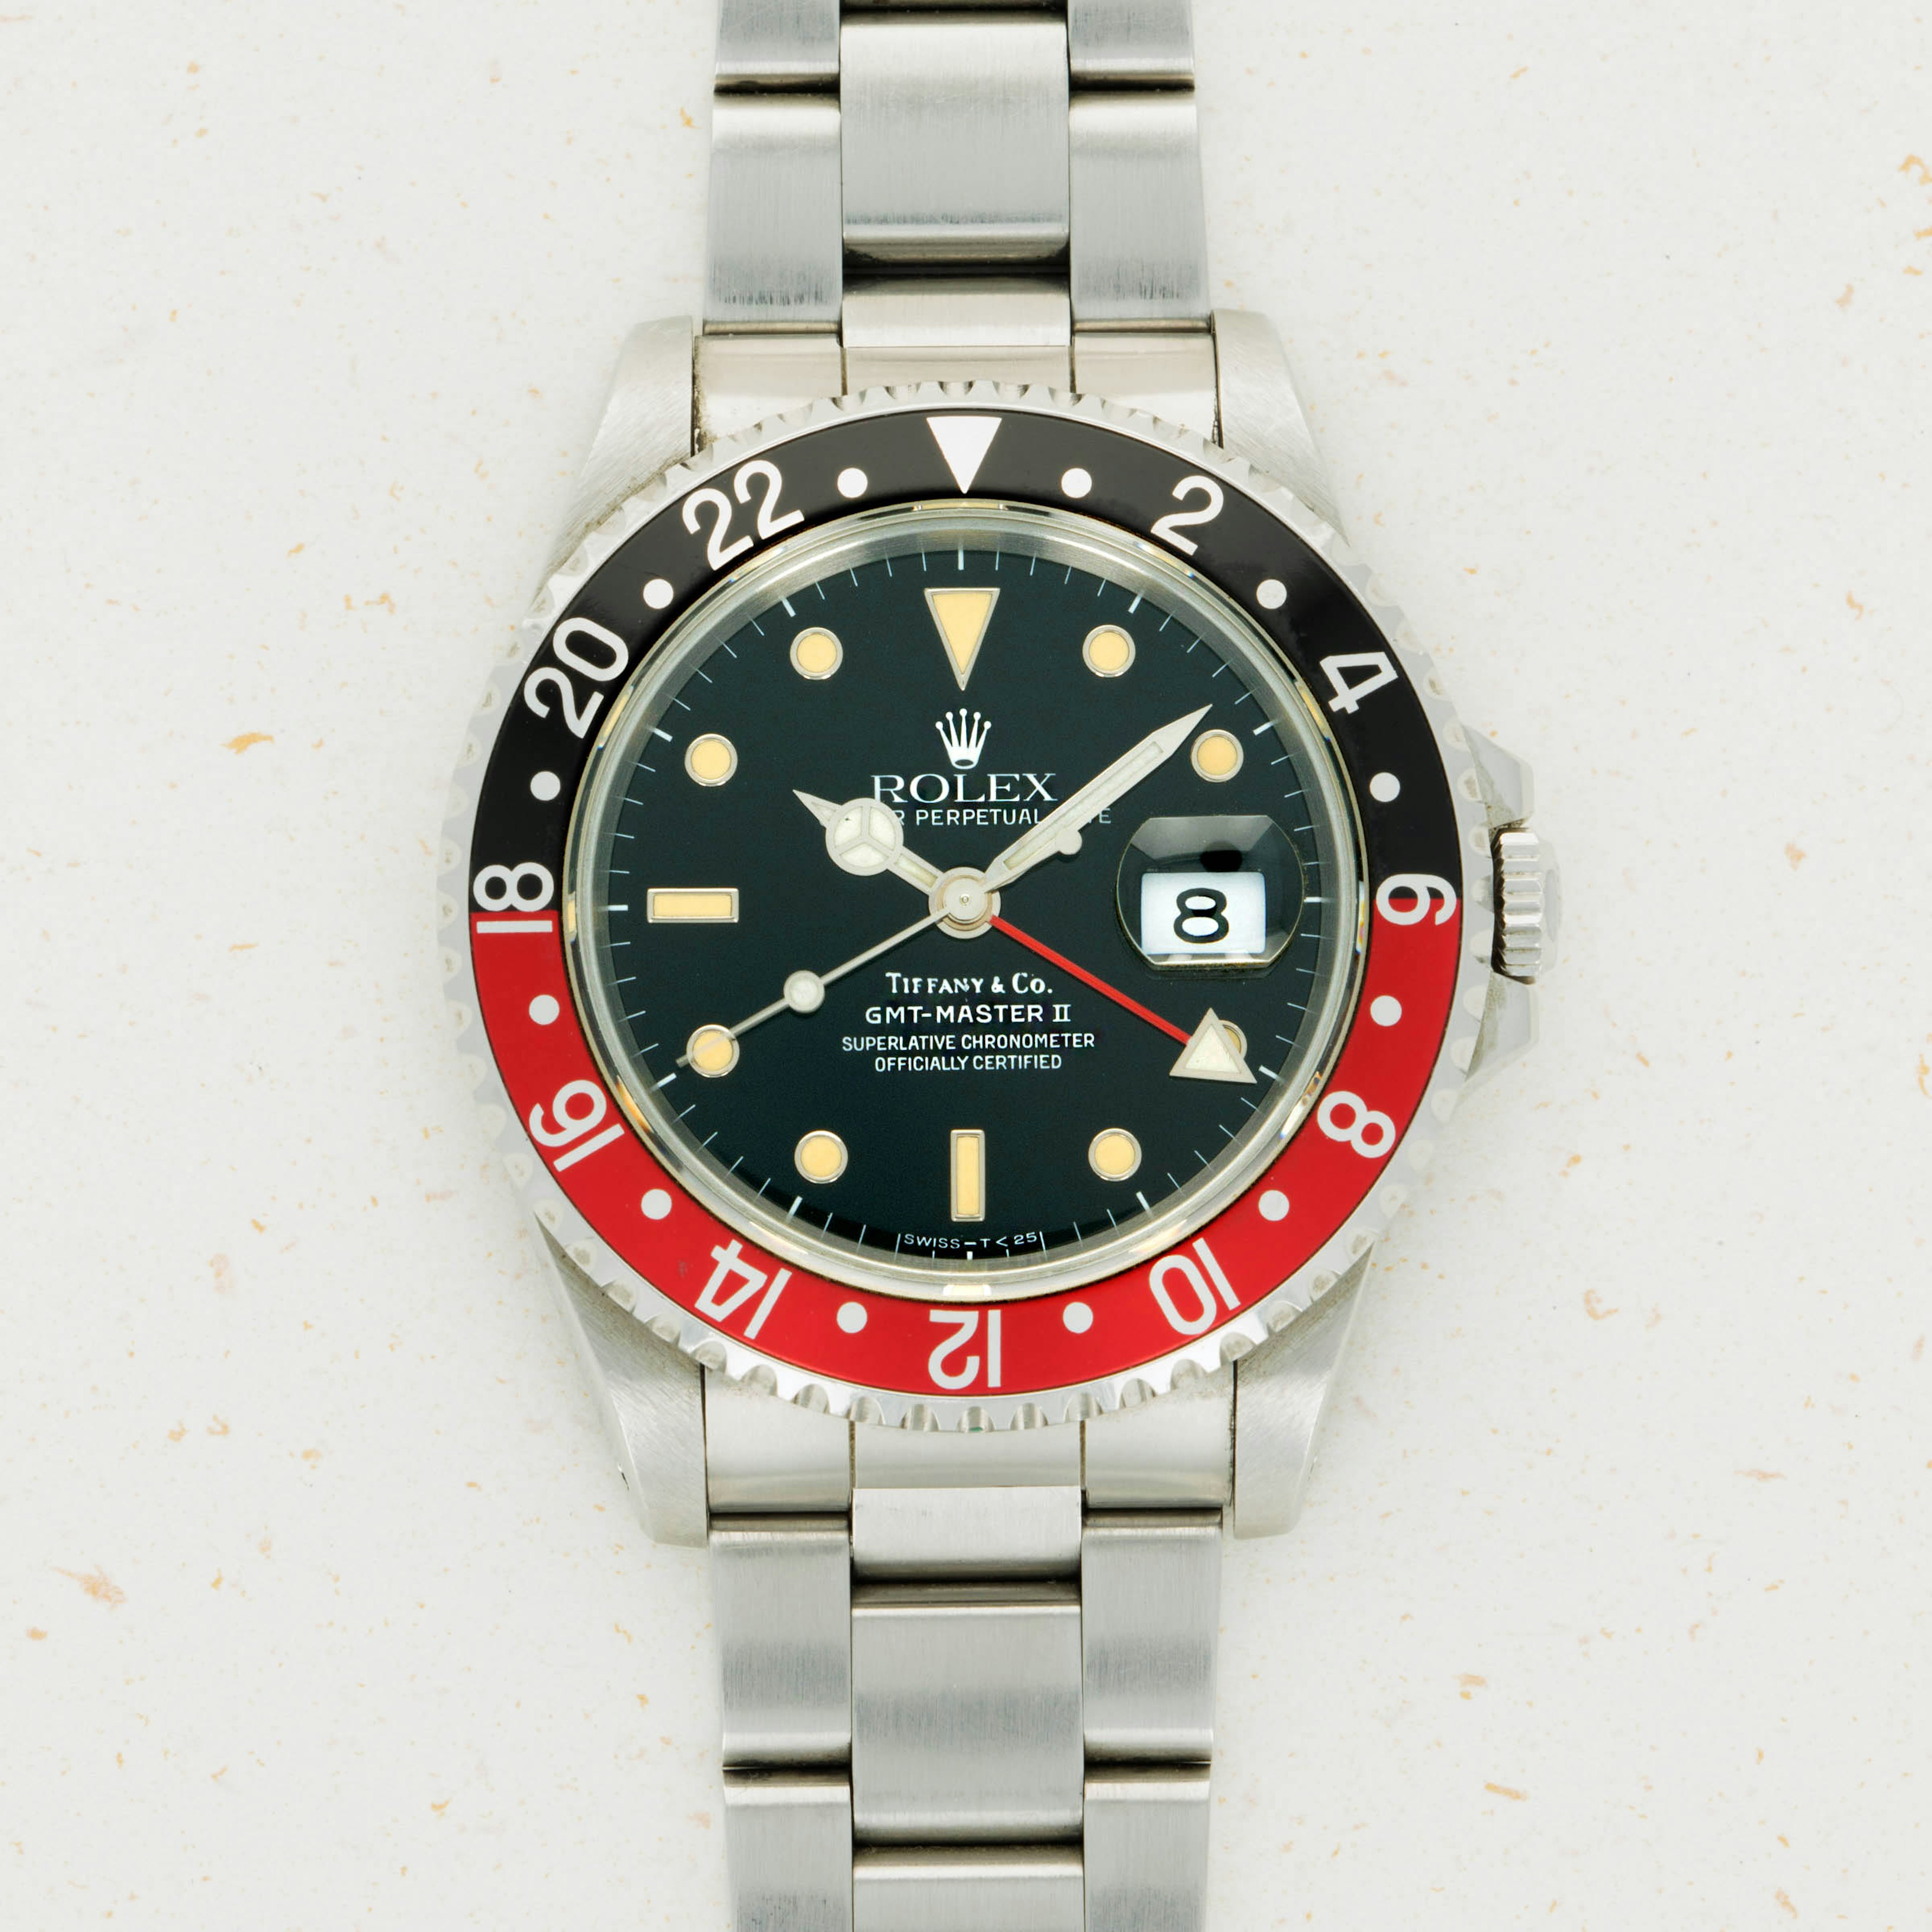 Thumbnail for Rolex GMT-Master II Tiffany & Co 16710